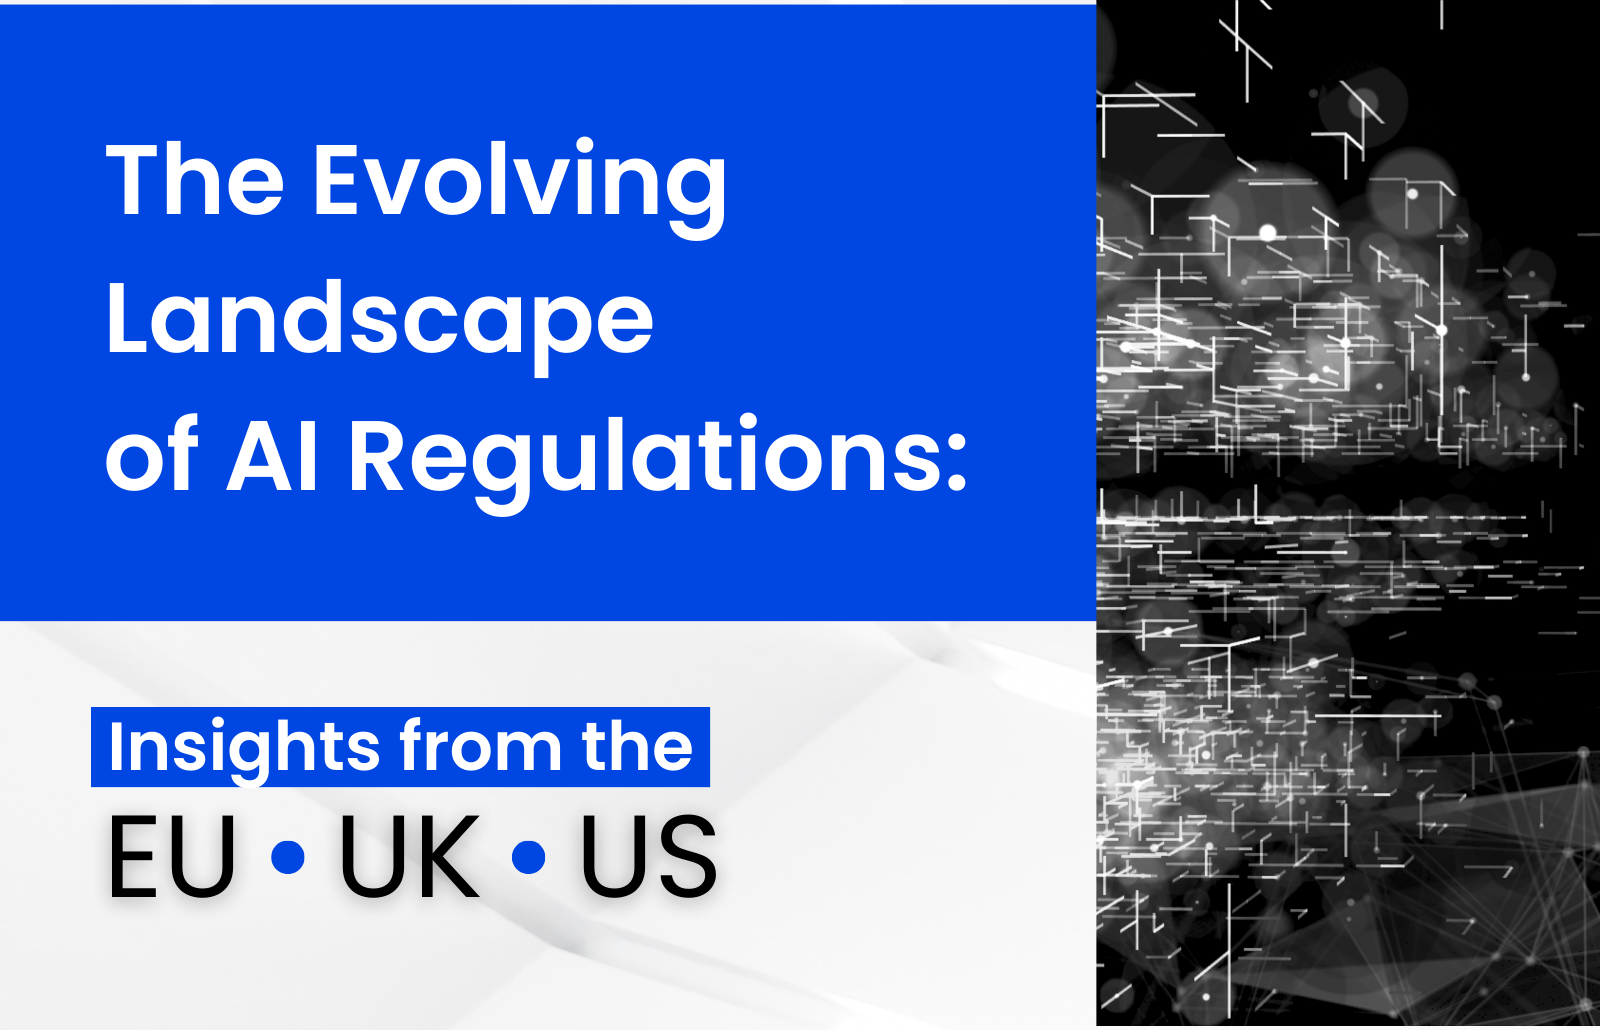 The Evolving Landscape of AI Regulations: Insights from the EU, UK, and US